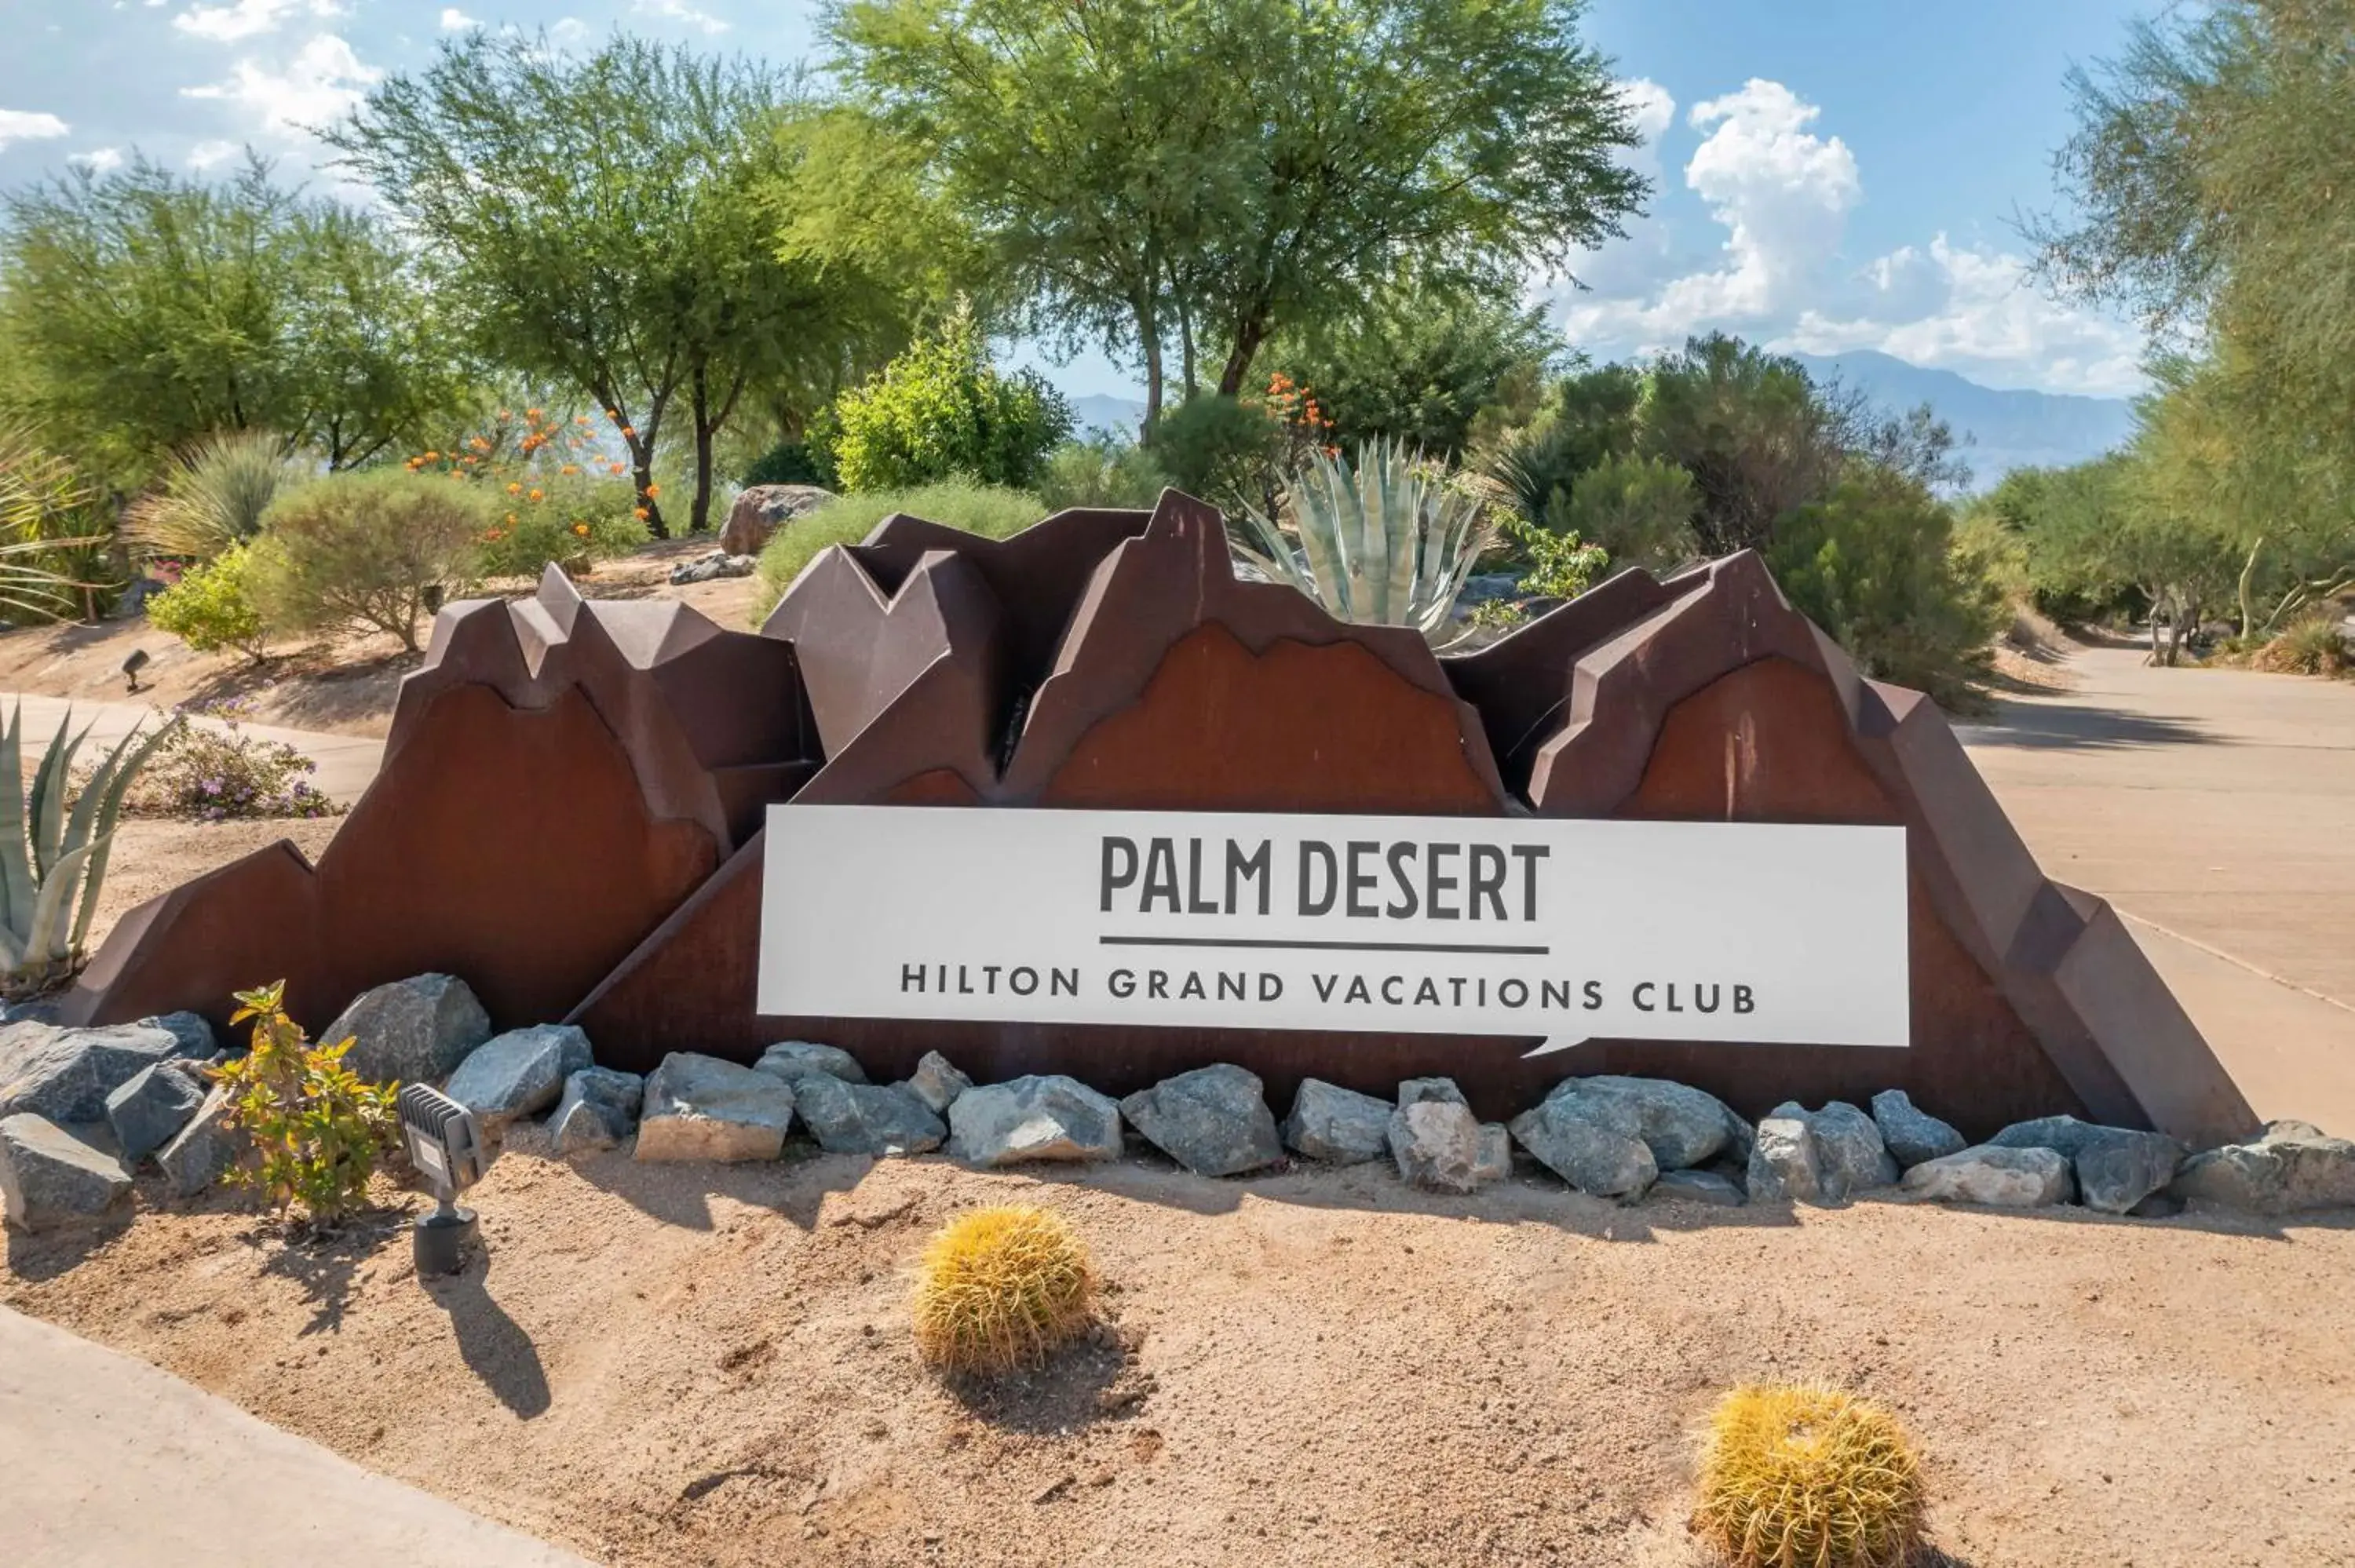 Property building in Hilton Grand Vacations Club Palm Desert